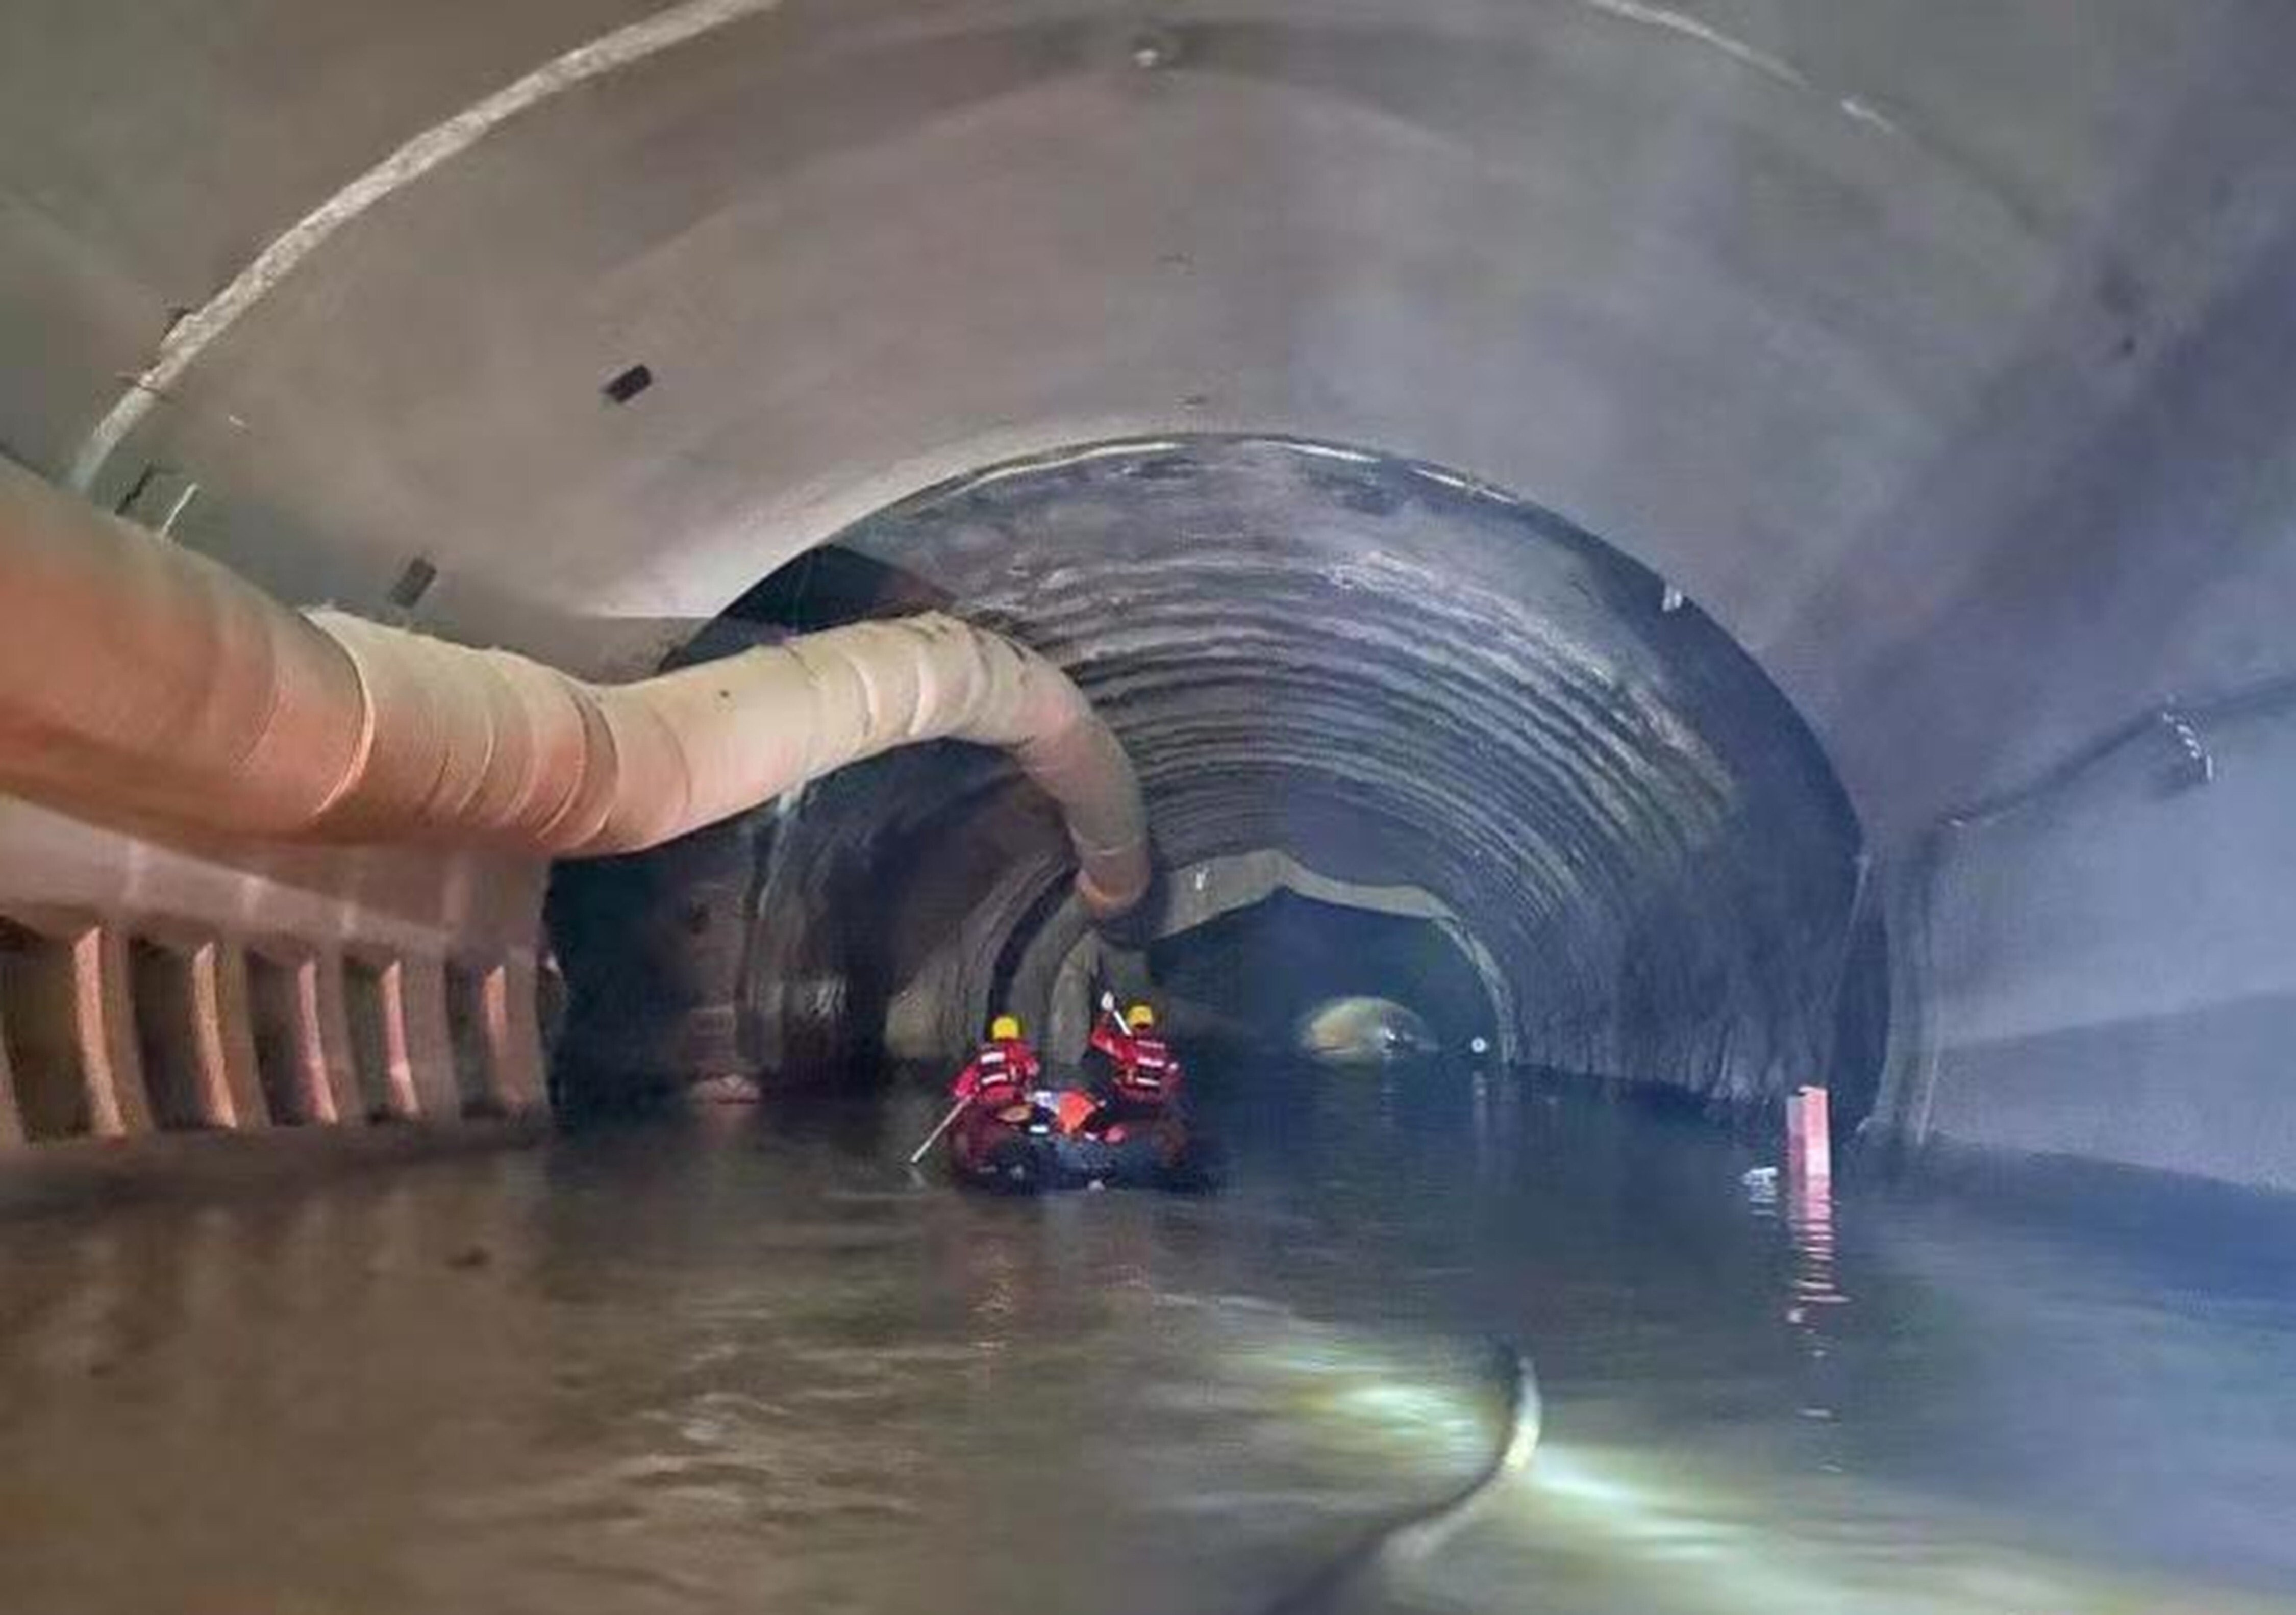 On Thursday, search teams were trying to rescue 14 construction workers trapped by an overnight flood in a tunnel being built in Zhuhai. The cause of the flood is not known. Photo: Weibo